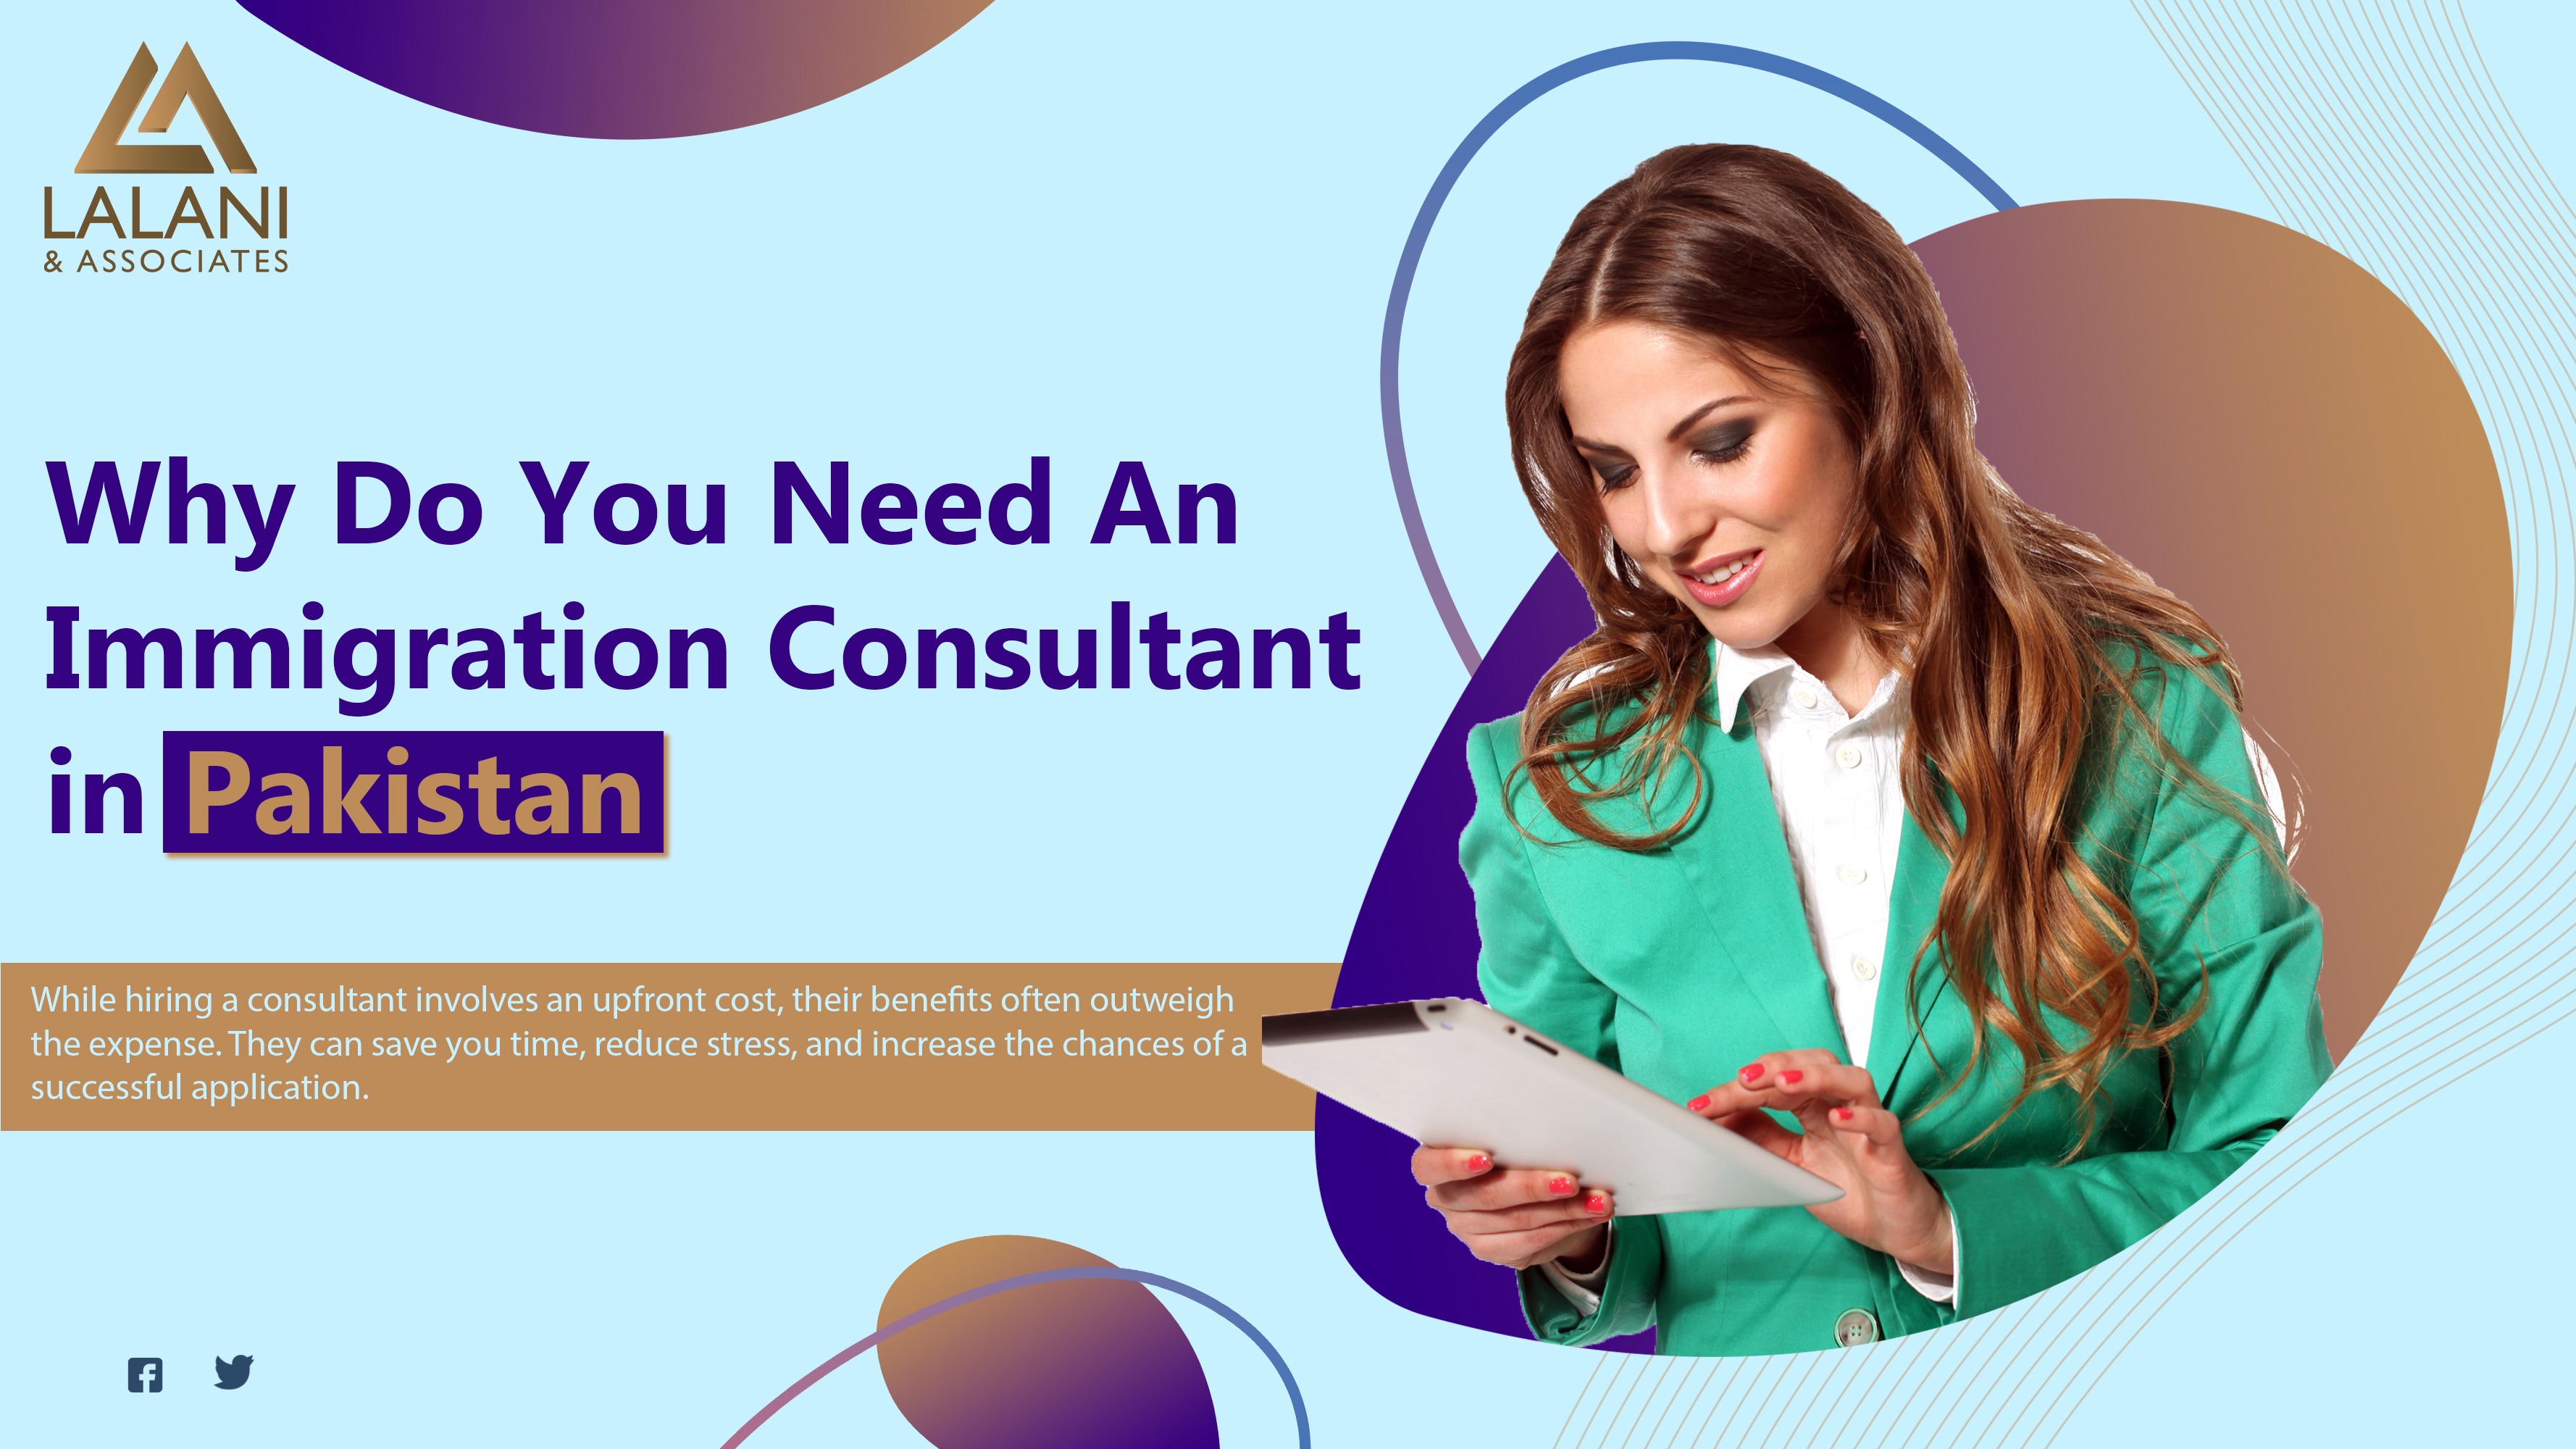 Why Do You Need An Immigration Consultant in Pakistan